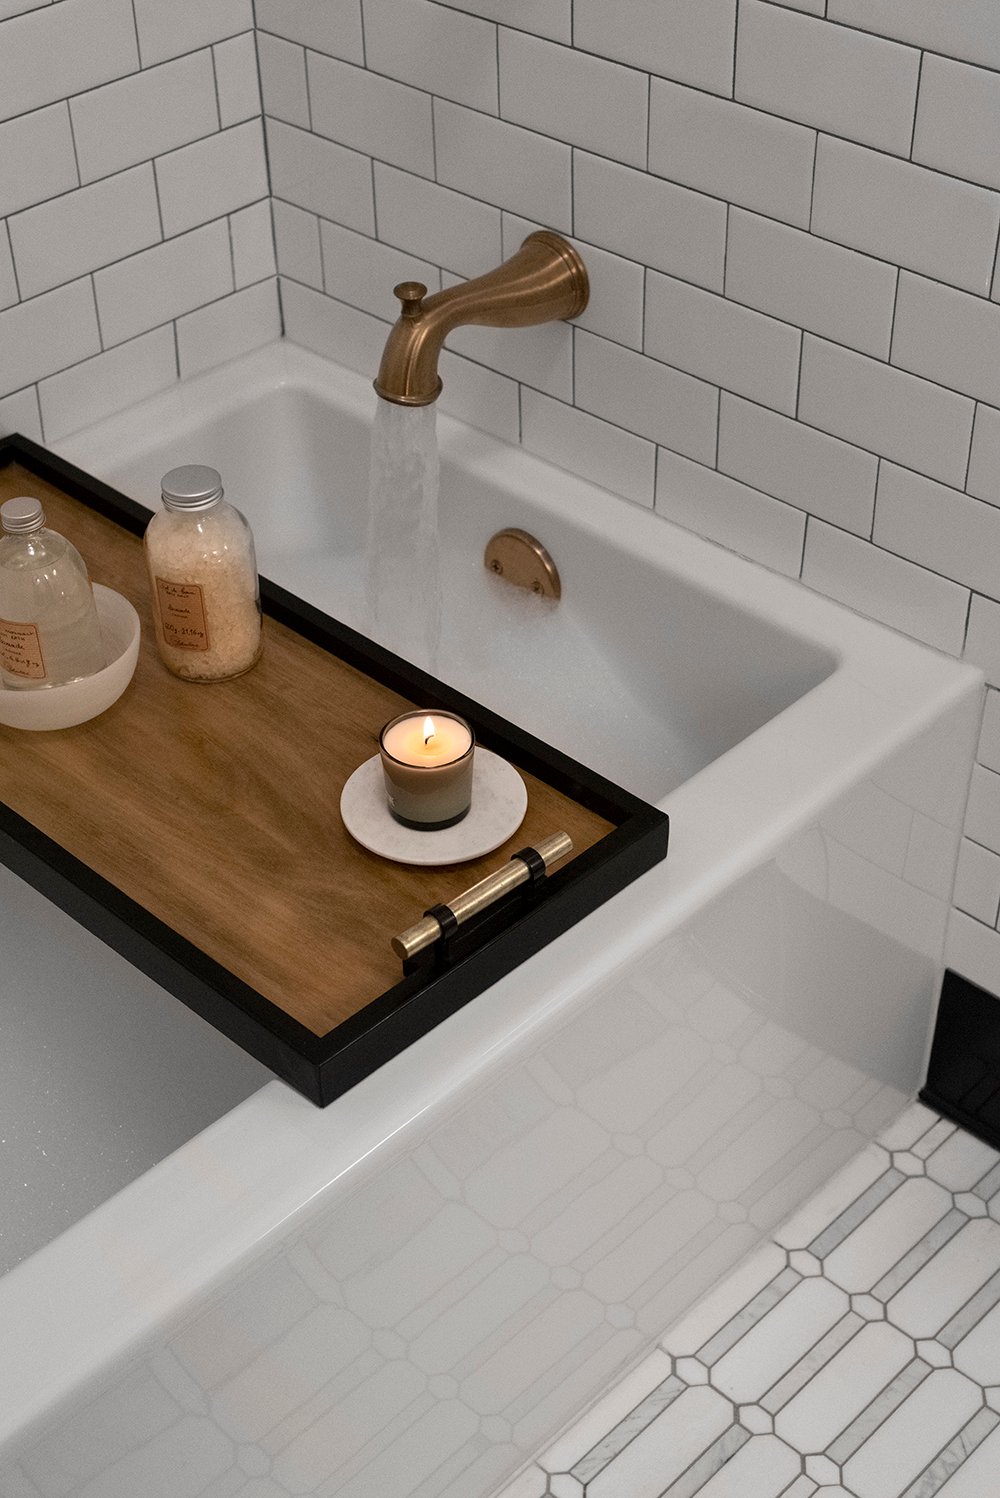 https://roomfortuesday.com/wp-content/uploads/2020/12/bath-tray.jpg